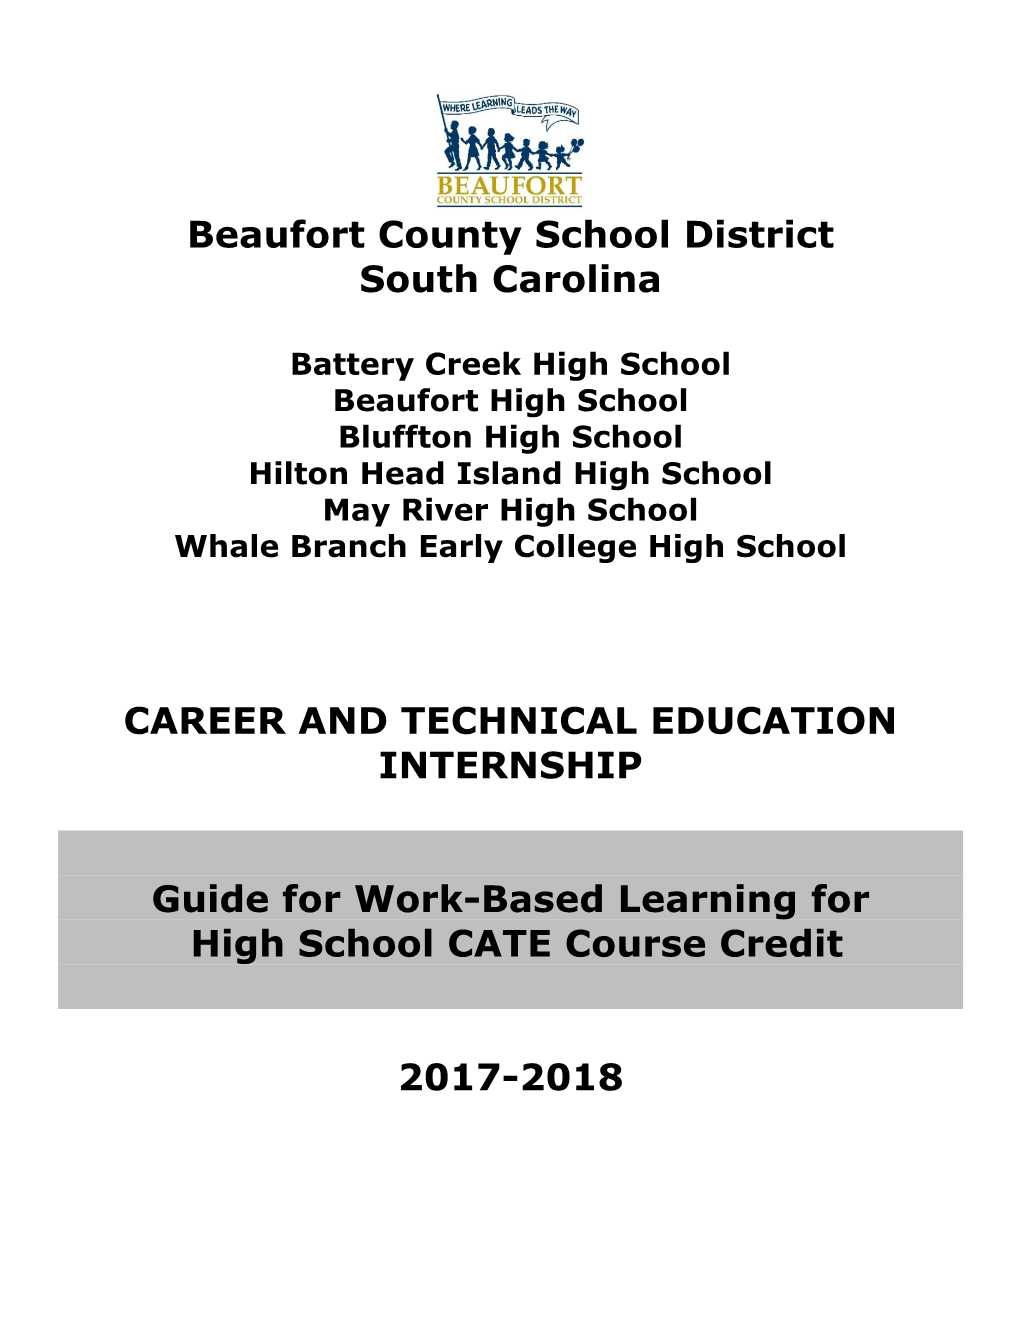 Beaufort County School District South Carolina CAREER AND